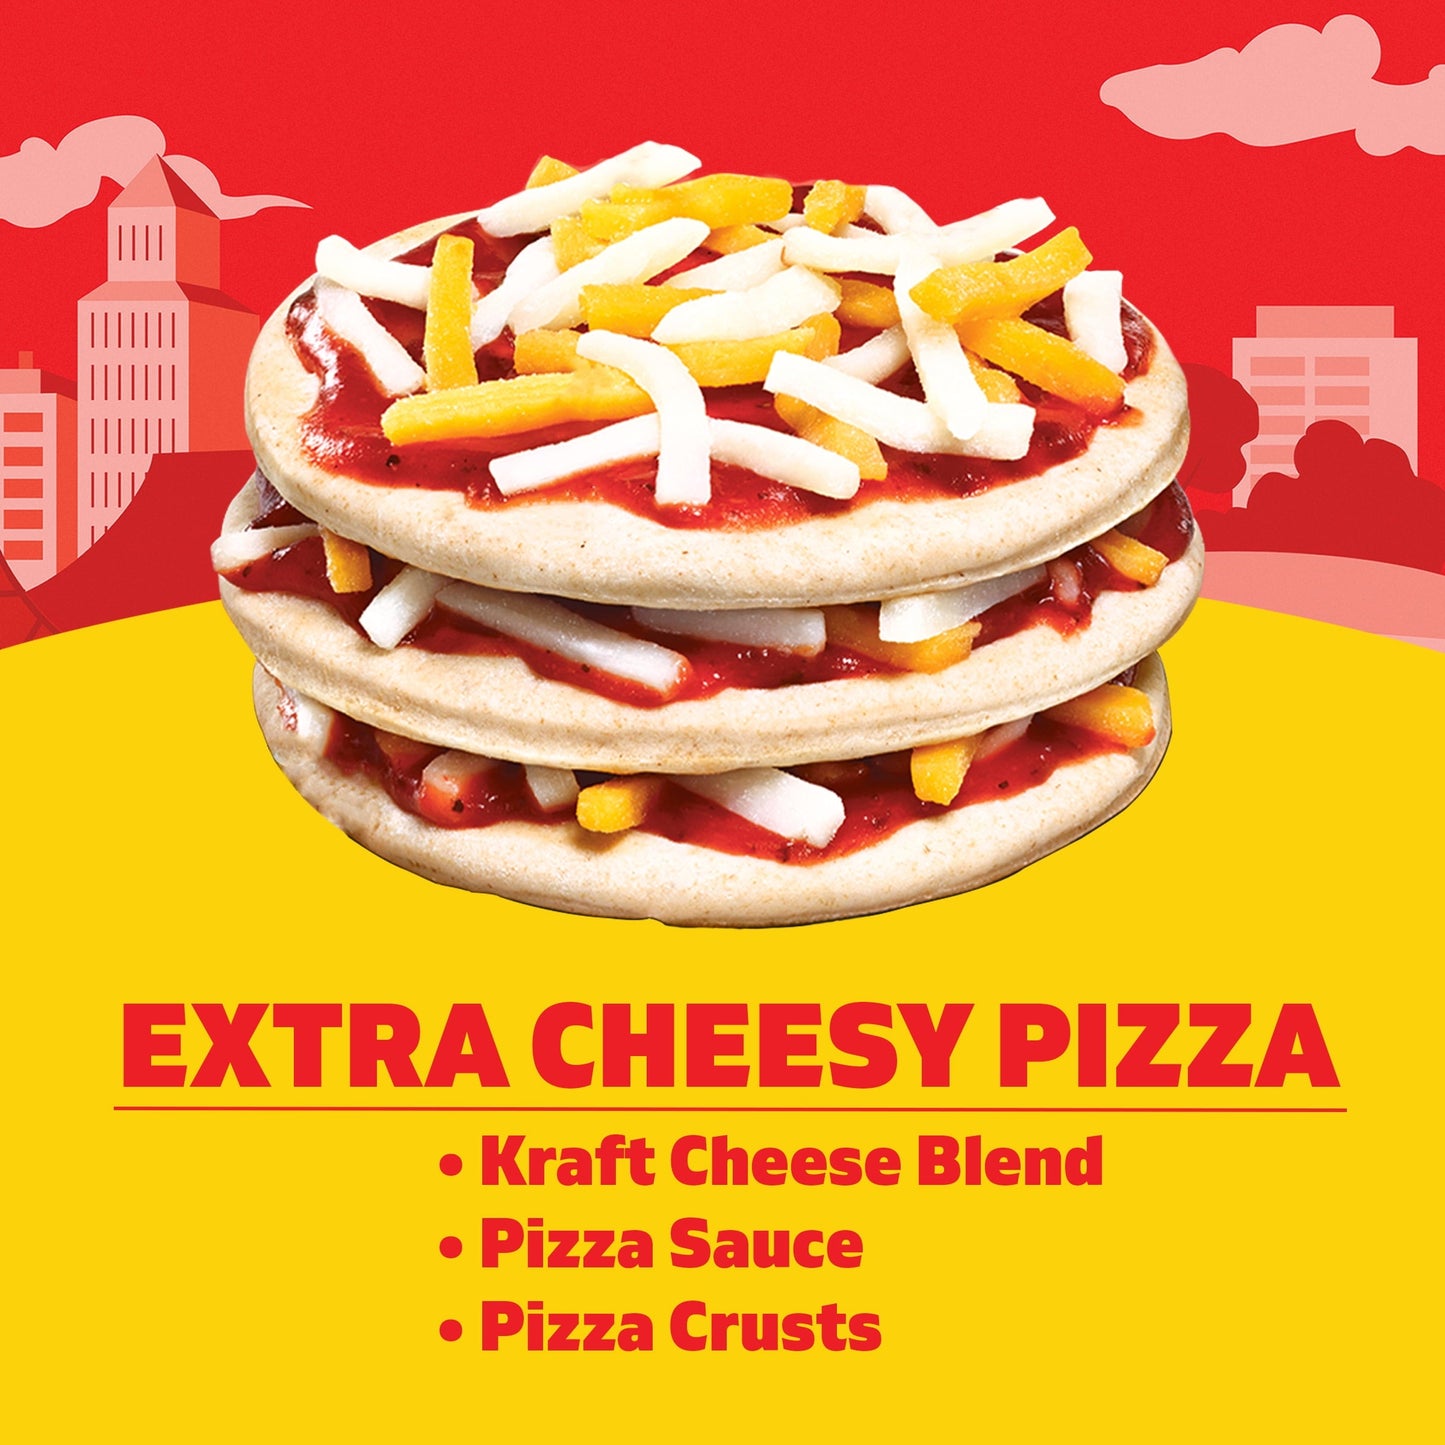 Lunchables Extra Cheesy Pizza Kids Lunch Snack, 4.2 oz Tray